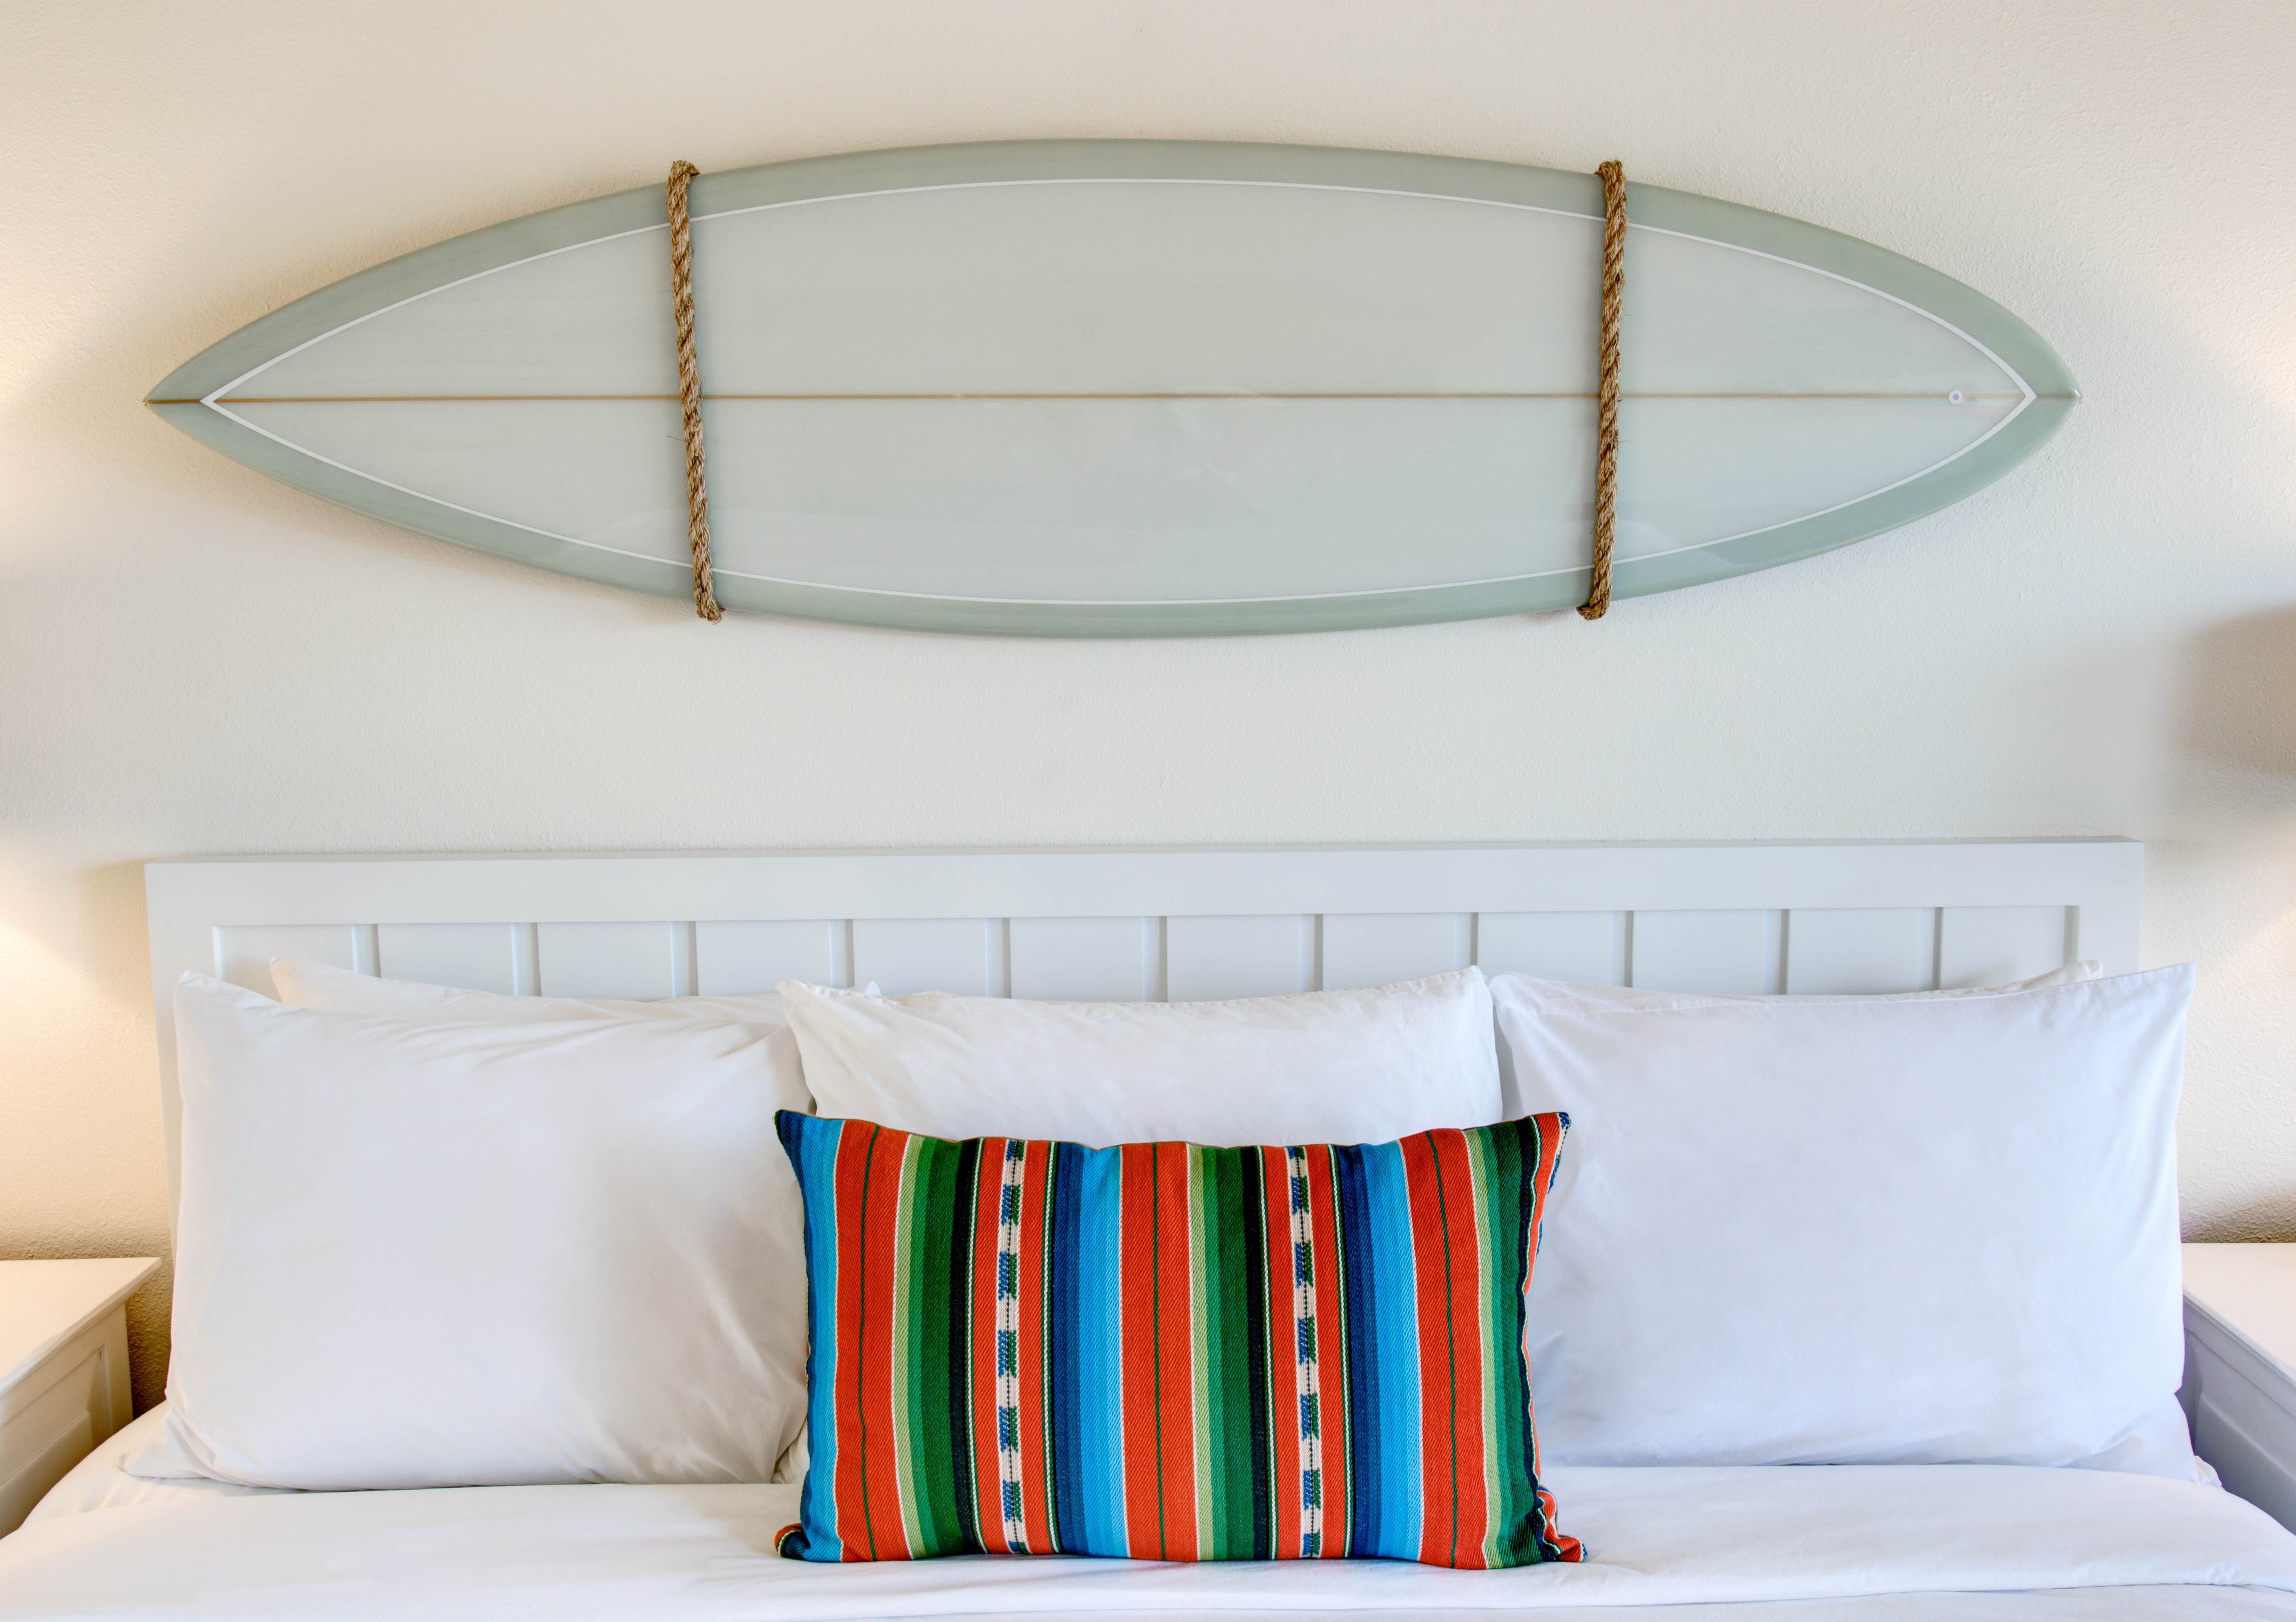 Custom-made surfboards hang over the beds at Laguna Beach House